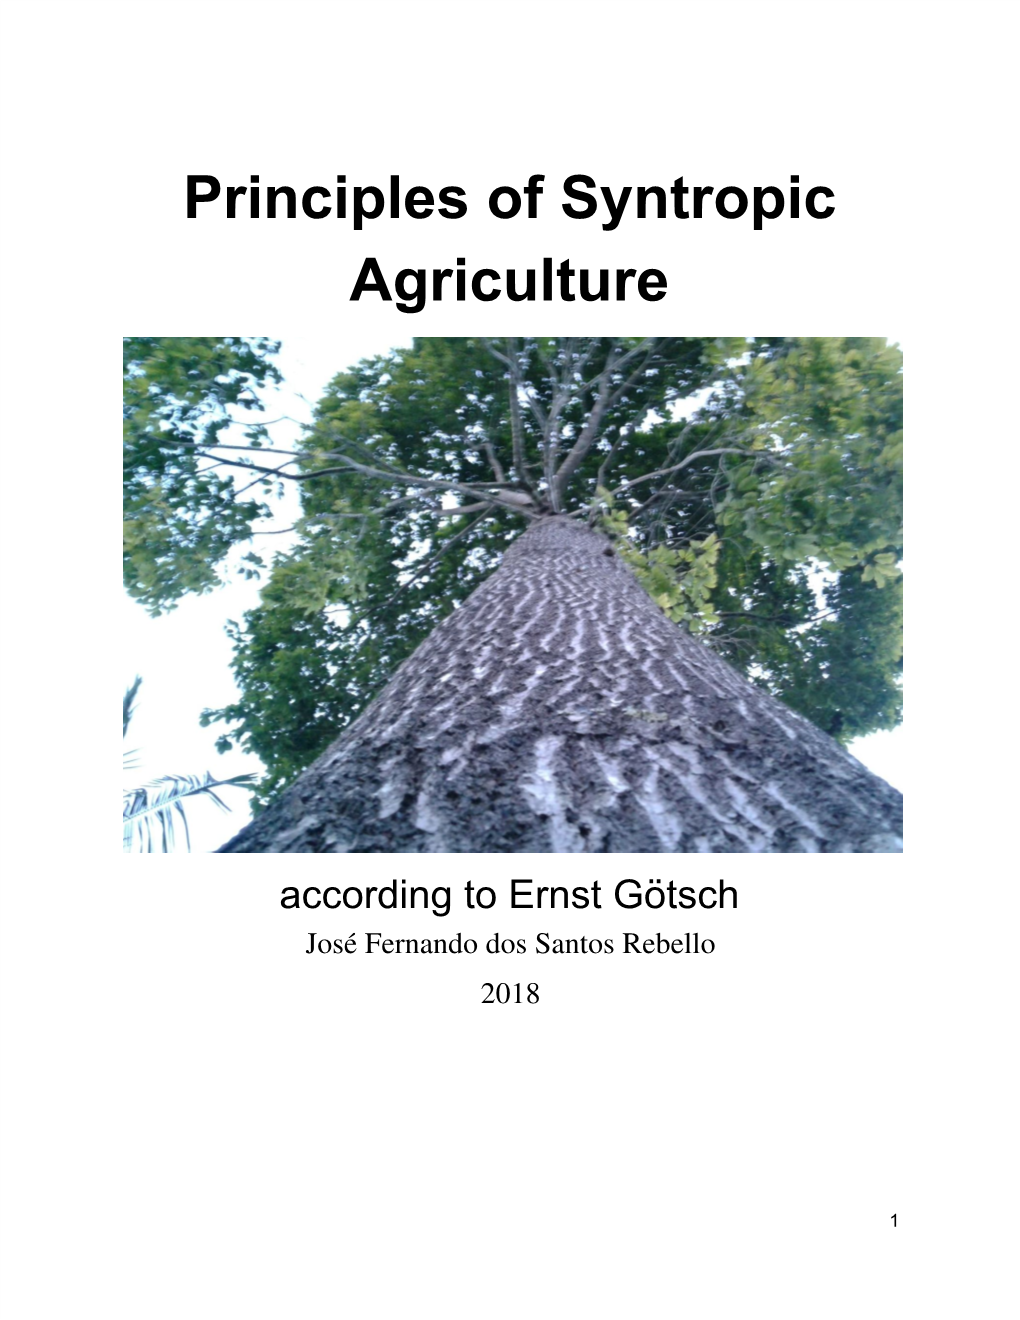 Principles of Syntropic Agriculture